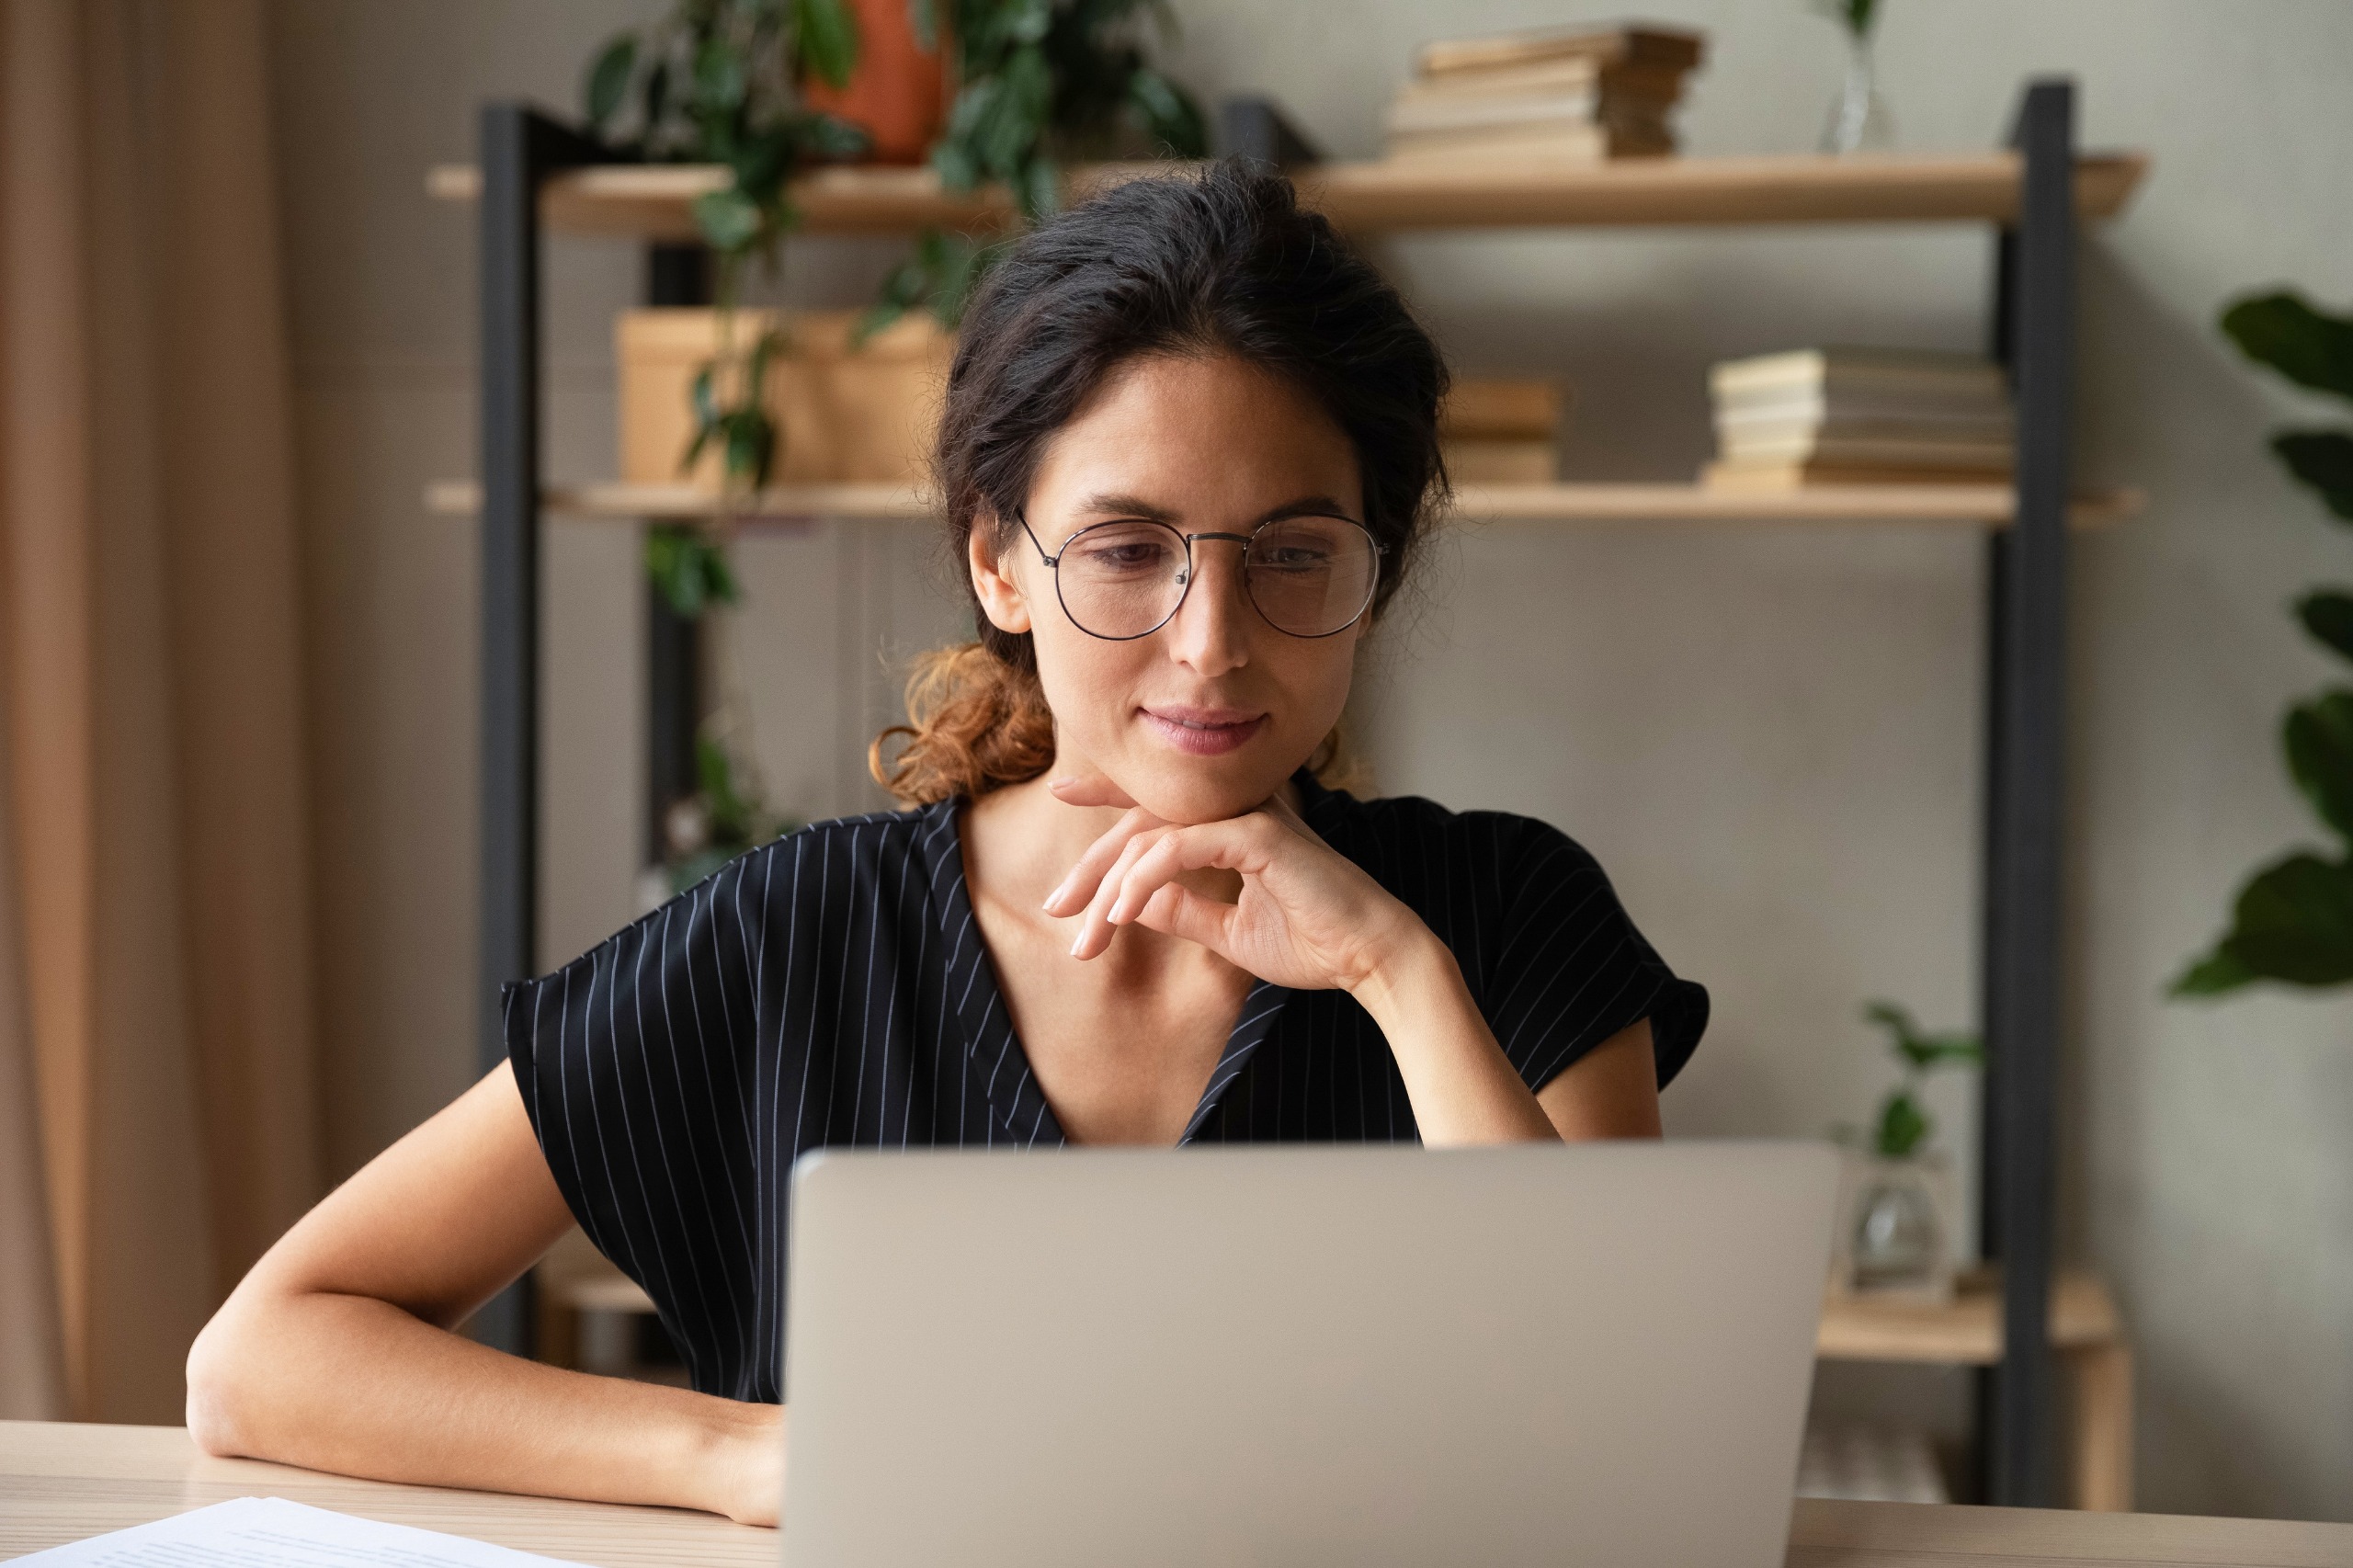 A girl wearing glasses sitting at a table working on a laptop